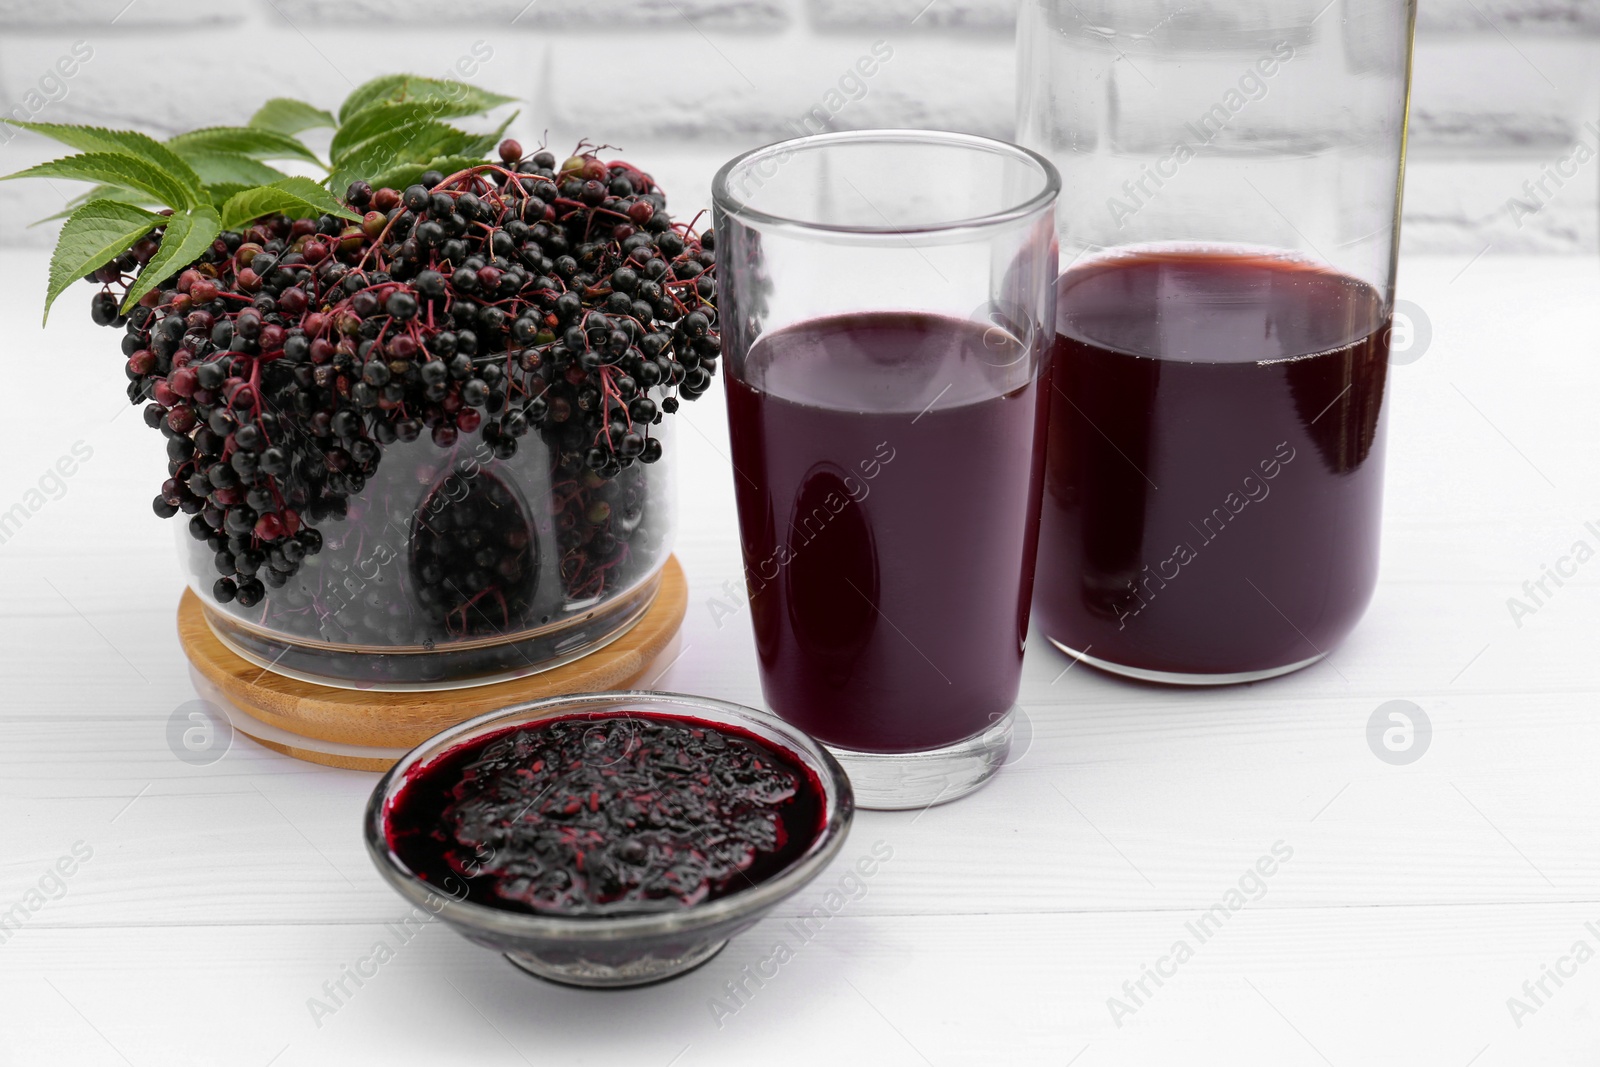 Photo of Elderberry drink and jam with Sambucus berries on white wooden table